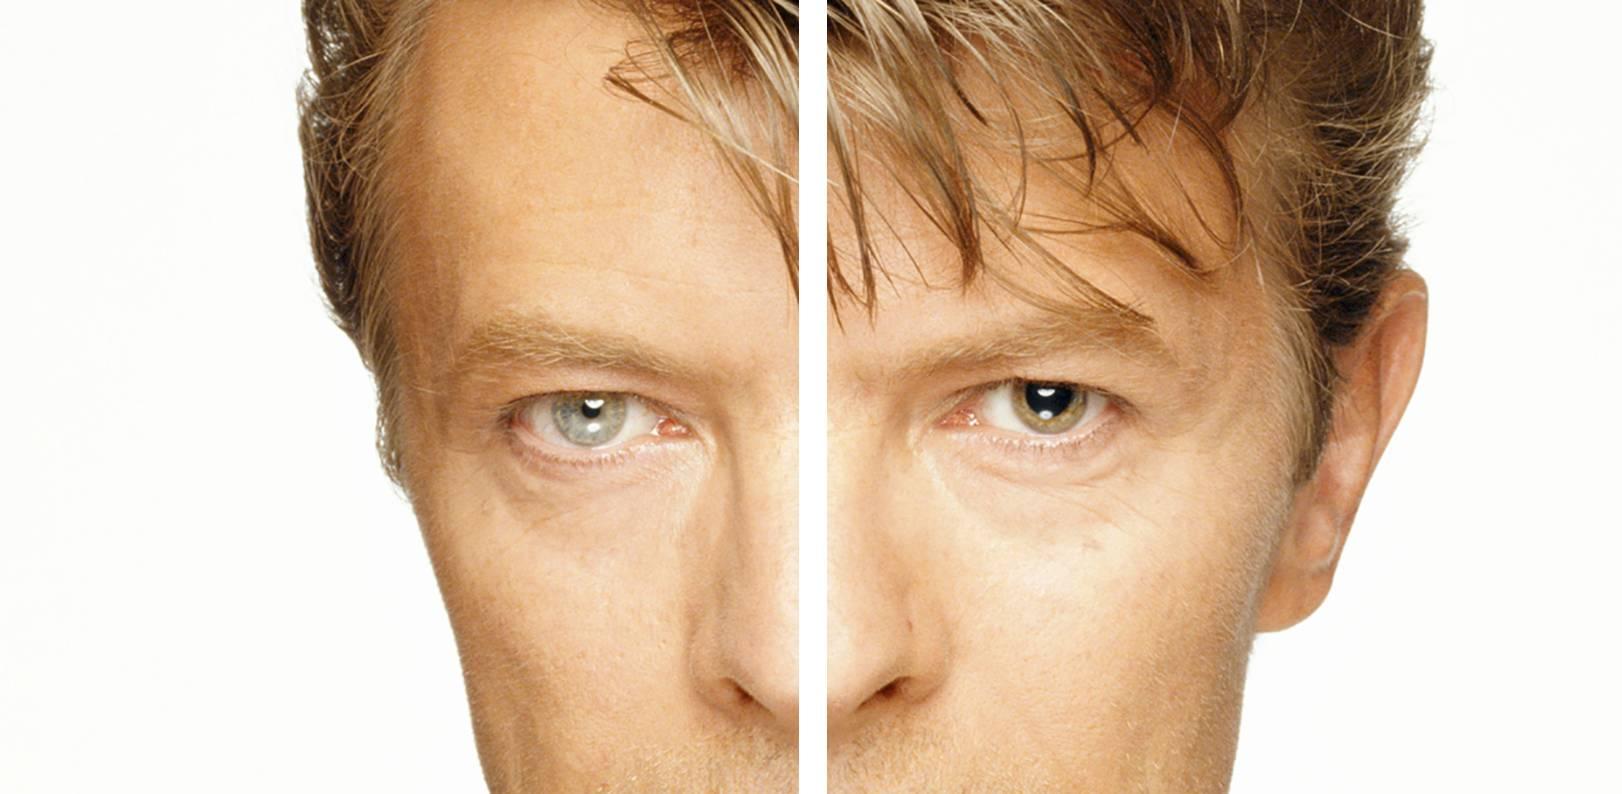 Terry O'Neill Portrait Photograph - David Bowie Eyes